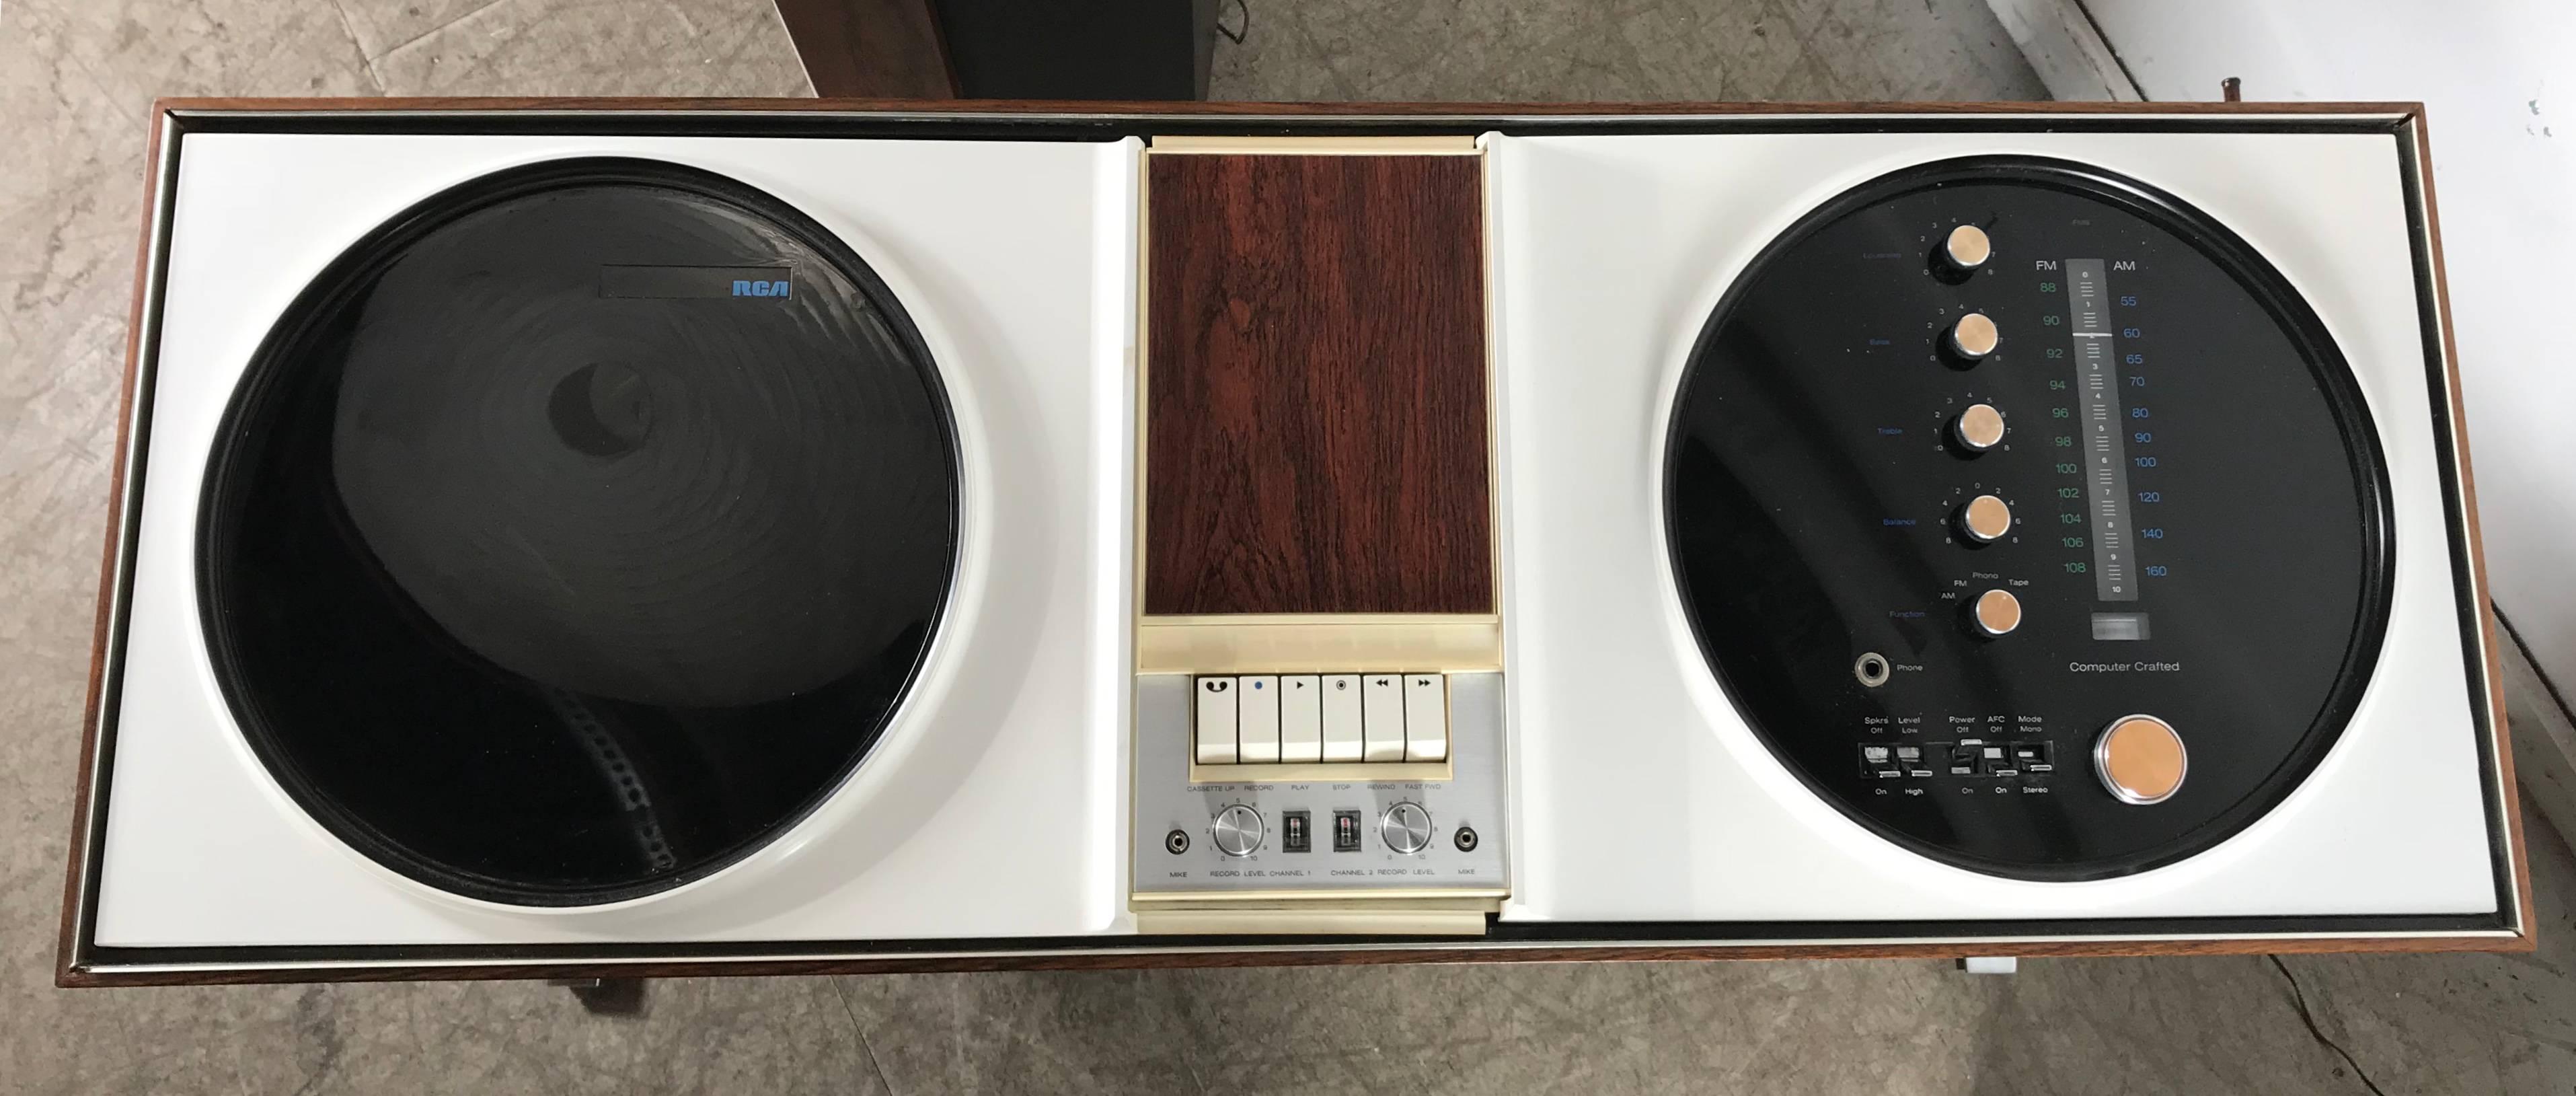 Late 20th Century Space Age RCA Stereo Console Prototype, 1970